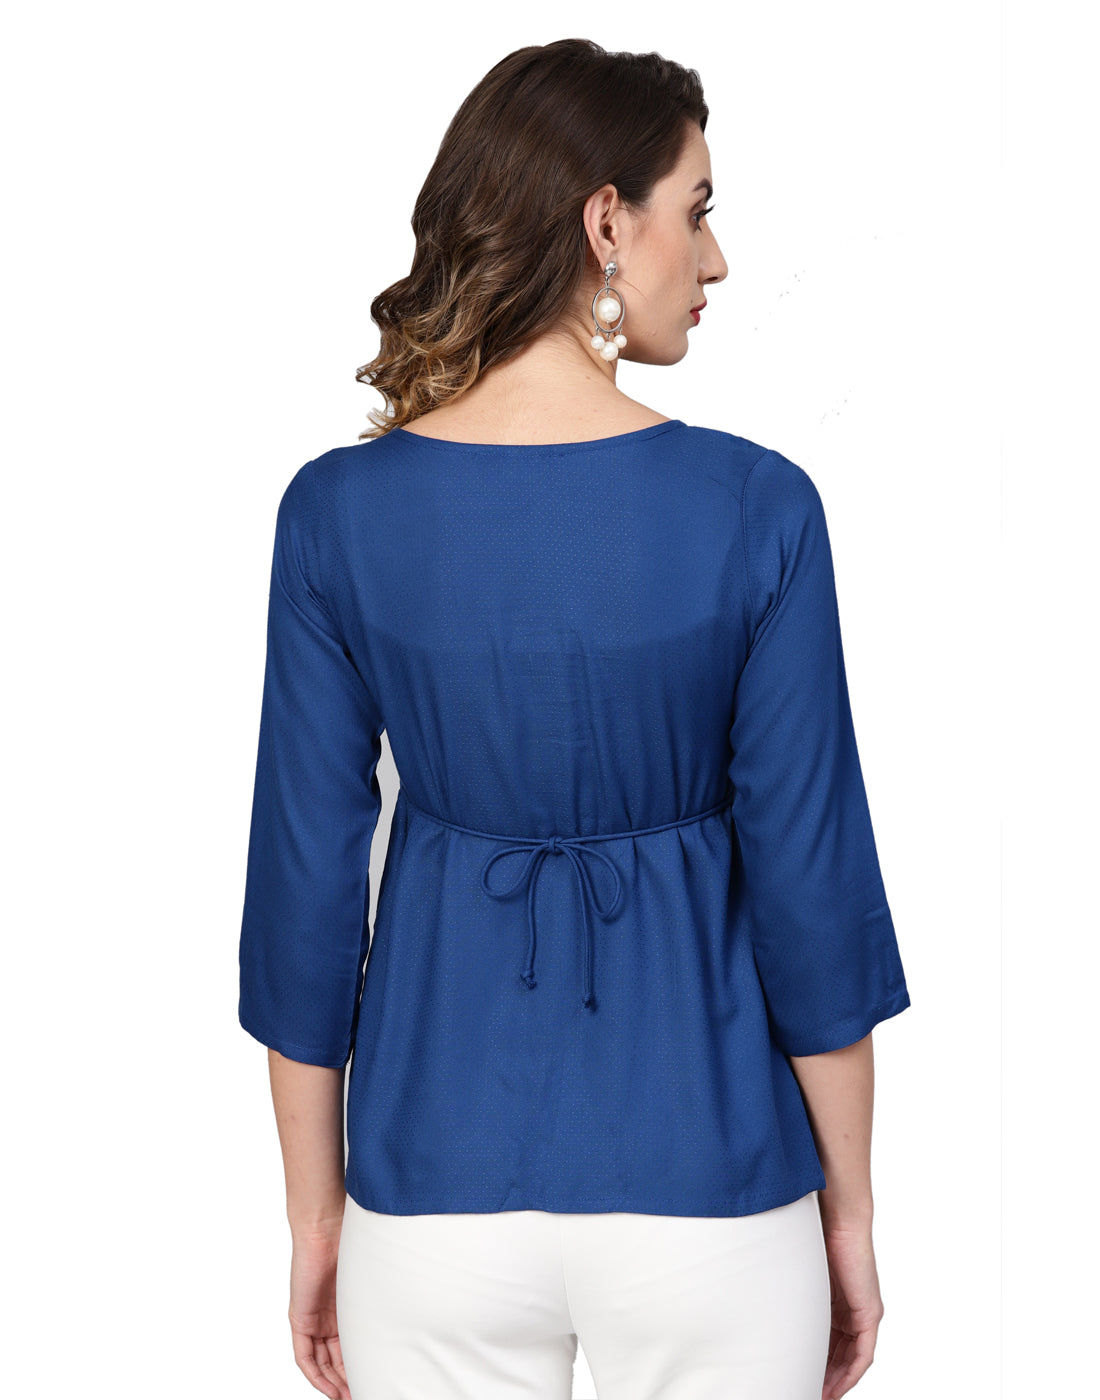 women dotted rayon dobby solid regular top blue